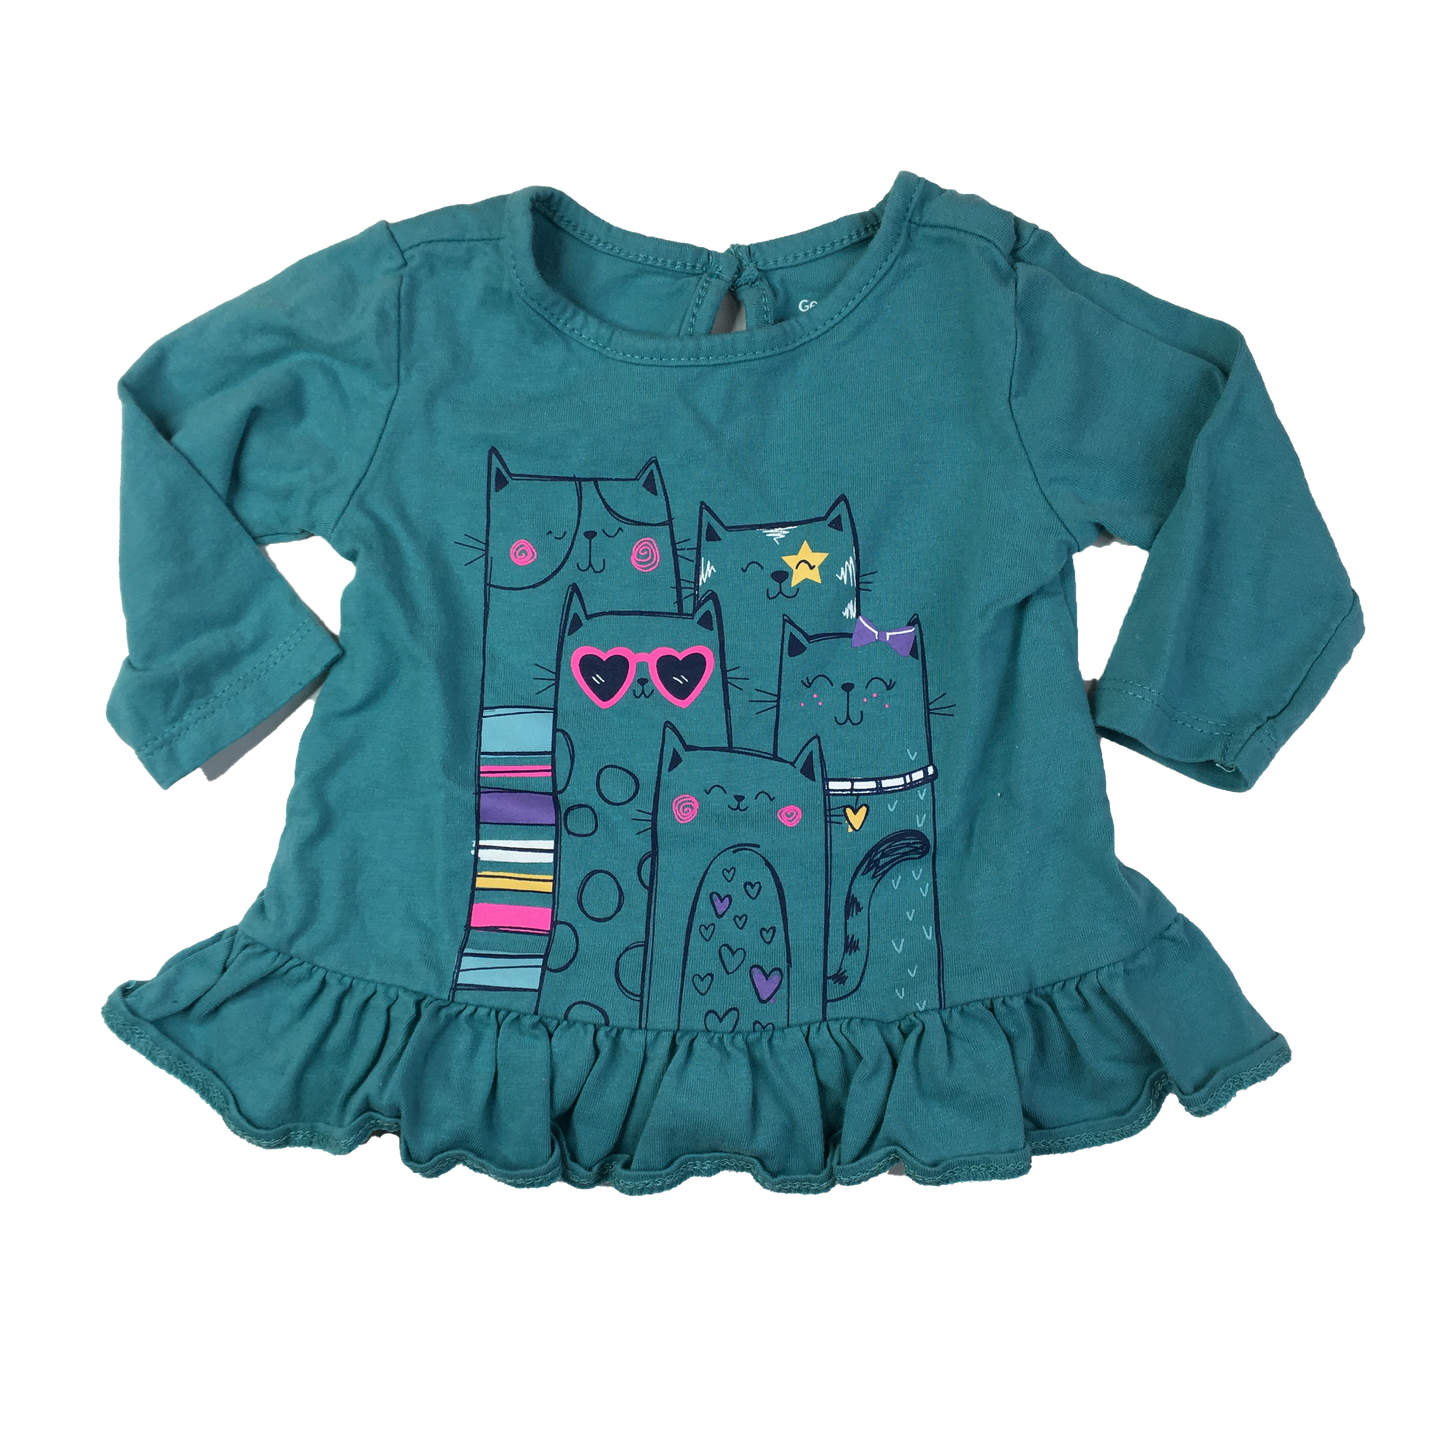 George Teal Long Sleeve Shirt with Cats 0-3M